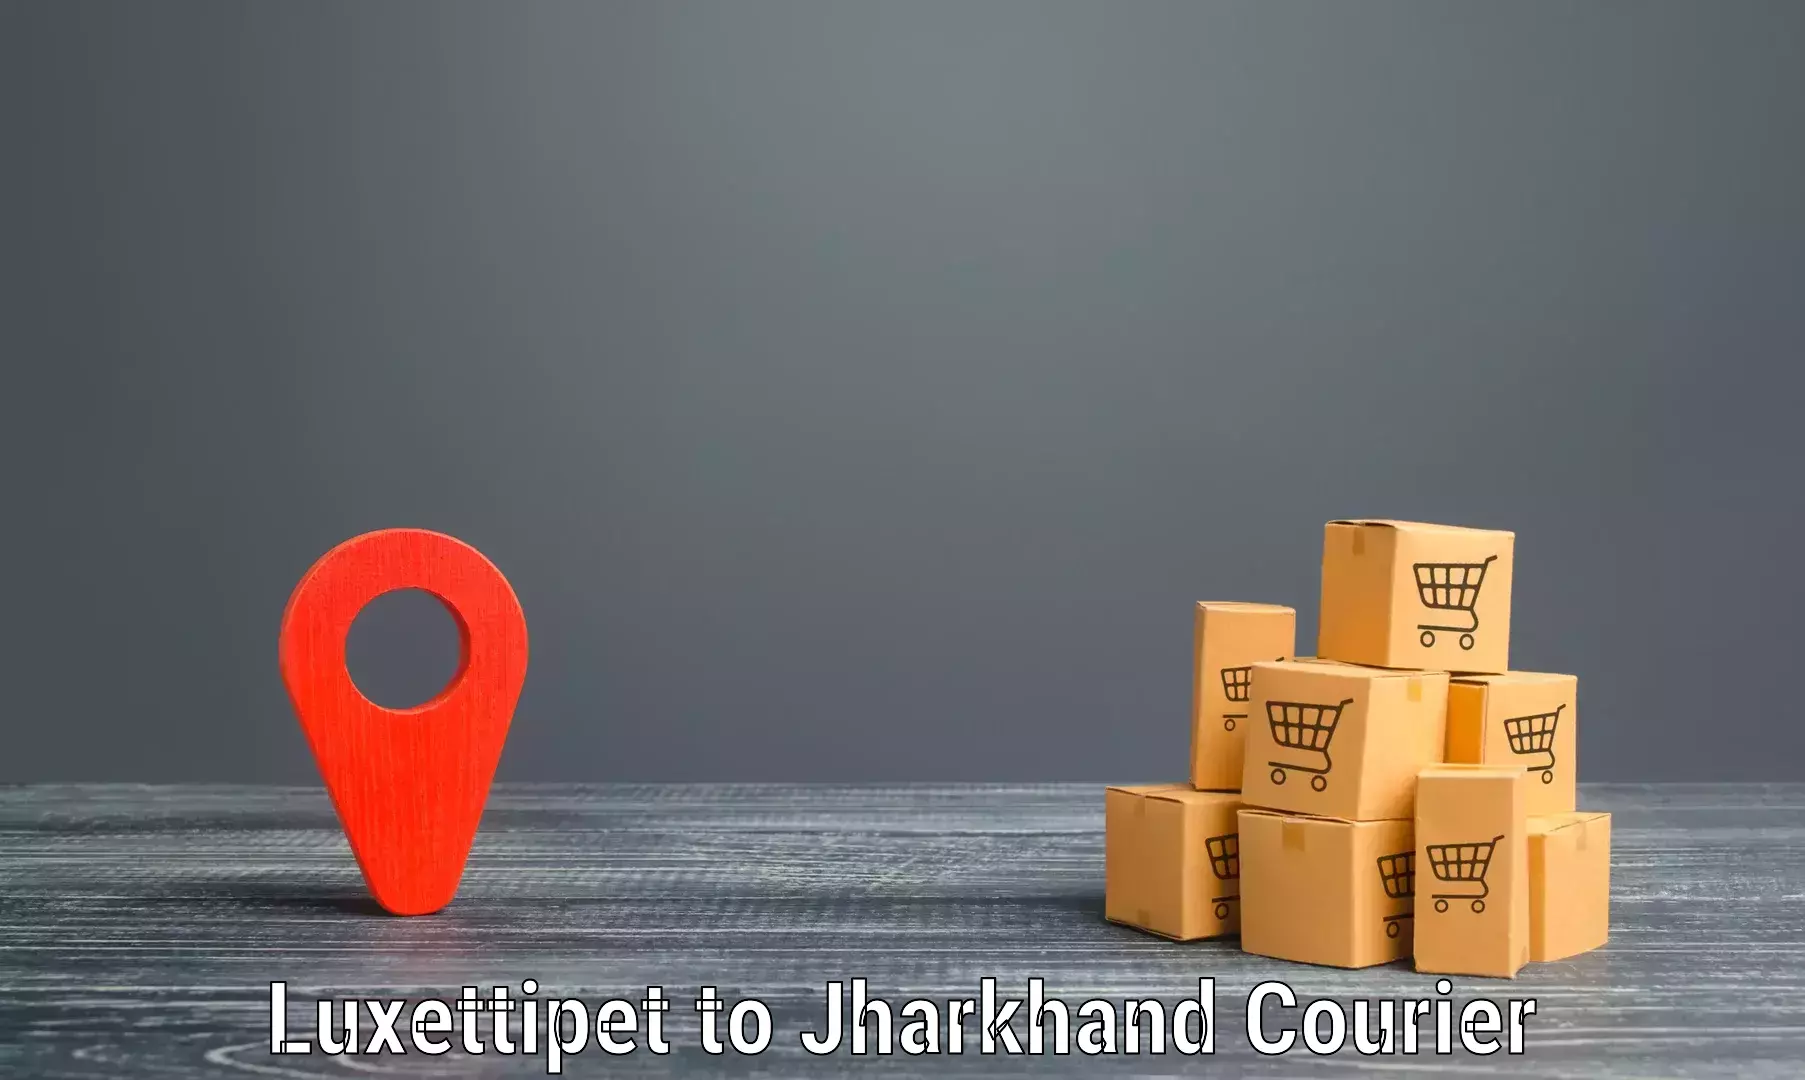 24-hour courier service Luxettipet to Dhanbad